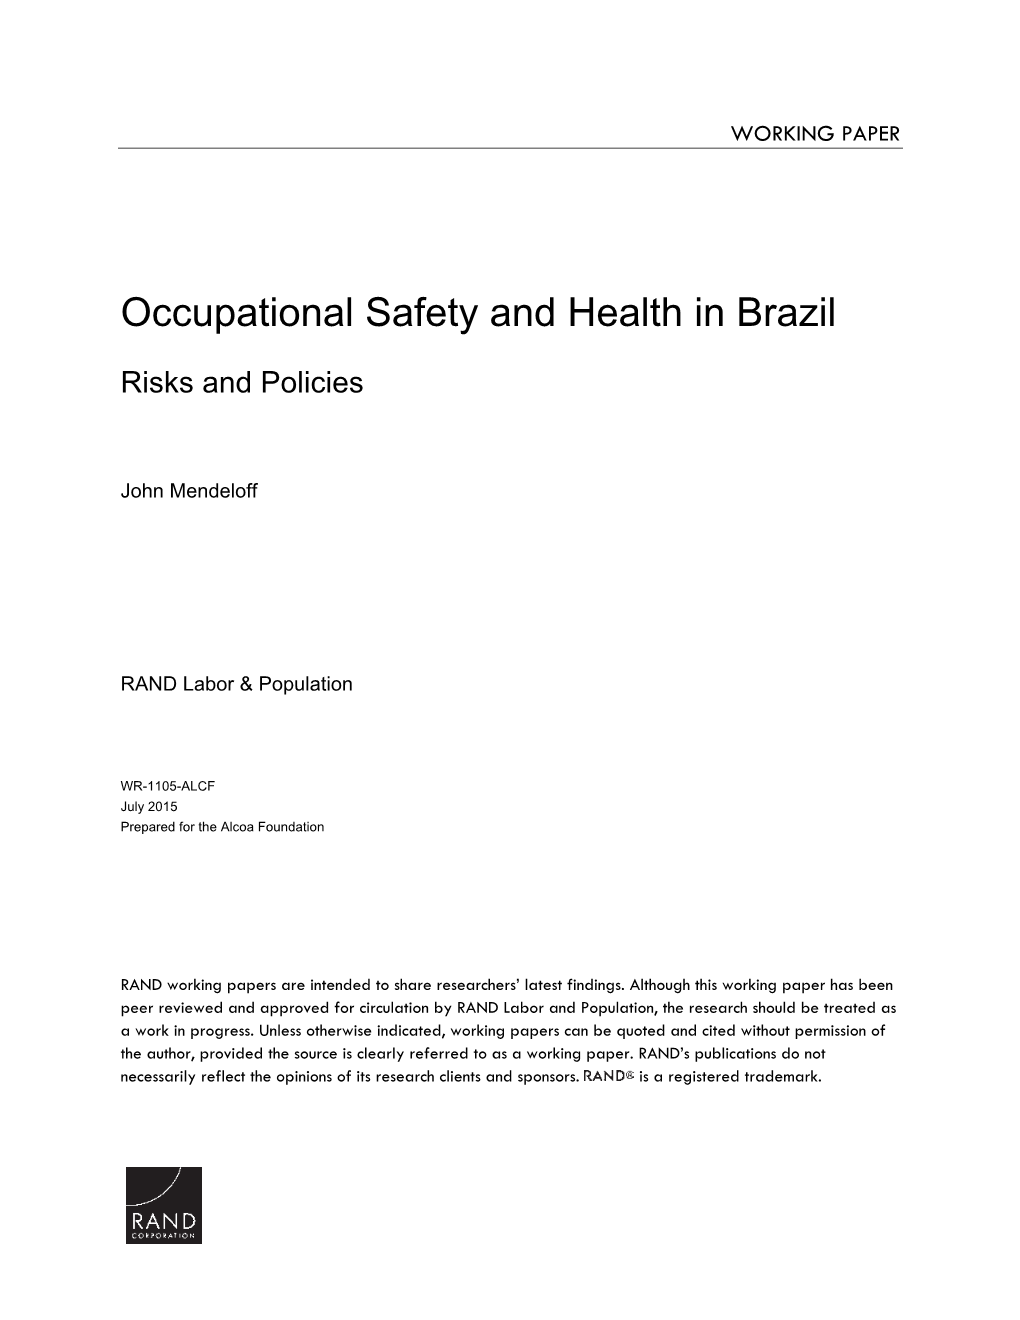 Occupational Safety and Health in Brazil